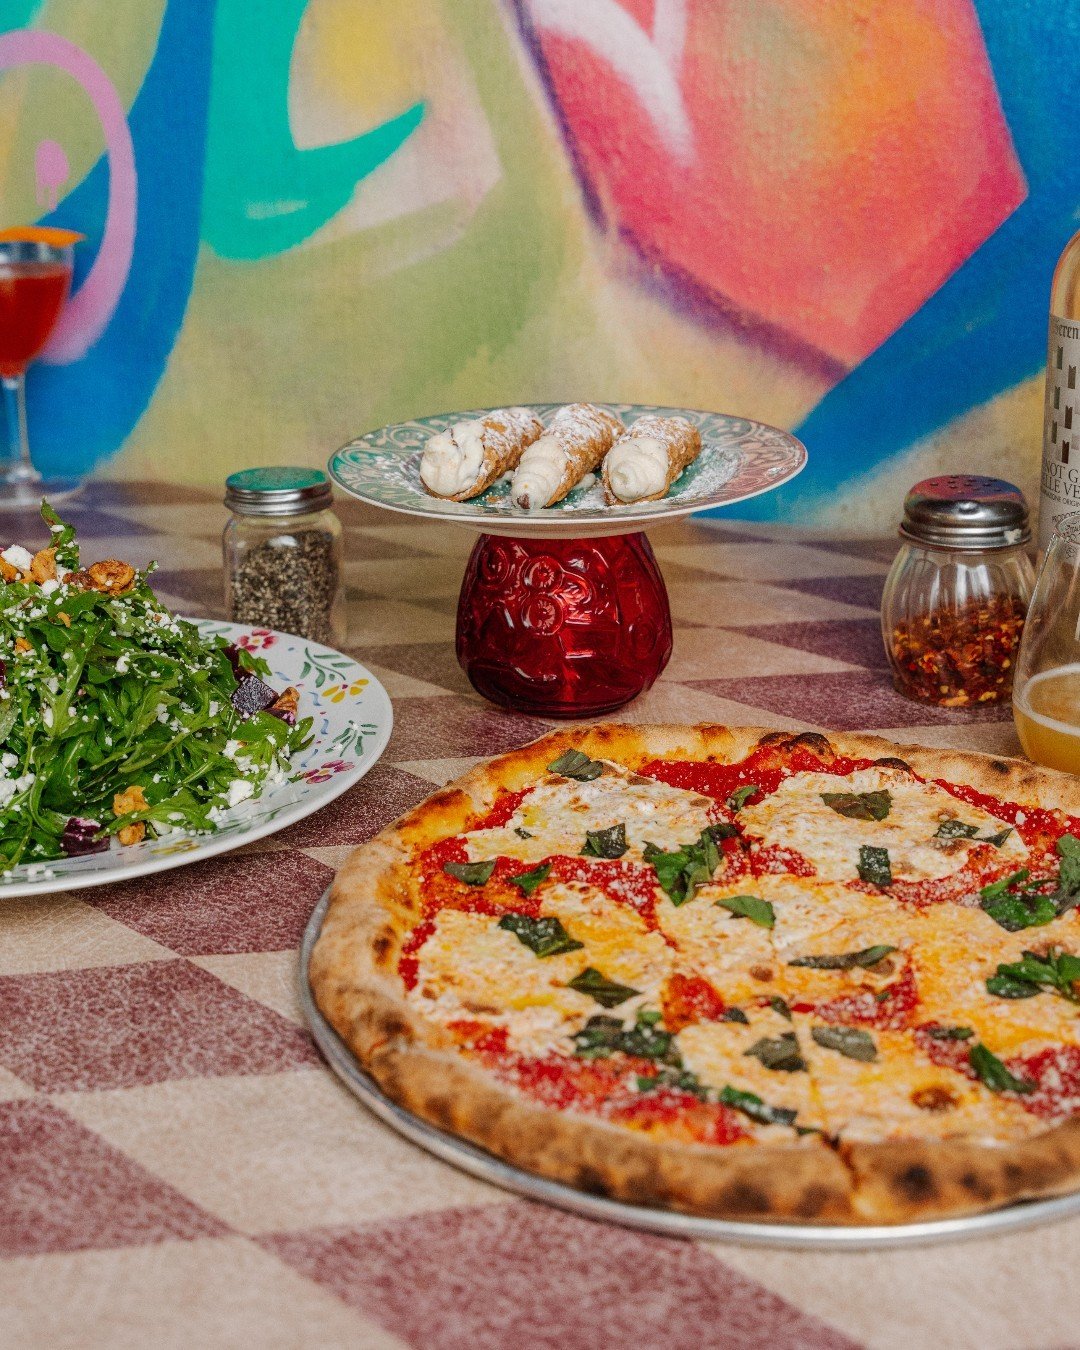 Get fancy with our Date Night Special&mdash;gourmet pizza, fresh salad, sweet cannoli, and wine, all for just $50.

&bull;
&bull;
#kingsbridgesocialclub #kingsbridge #pizza #pizzalovers #bronx #bronxny #newforkcity #nyceats #nycfoodie #italianfood #e